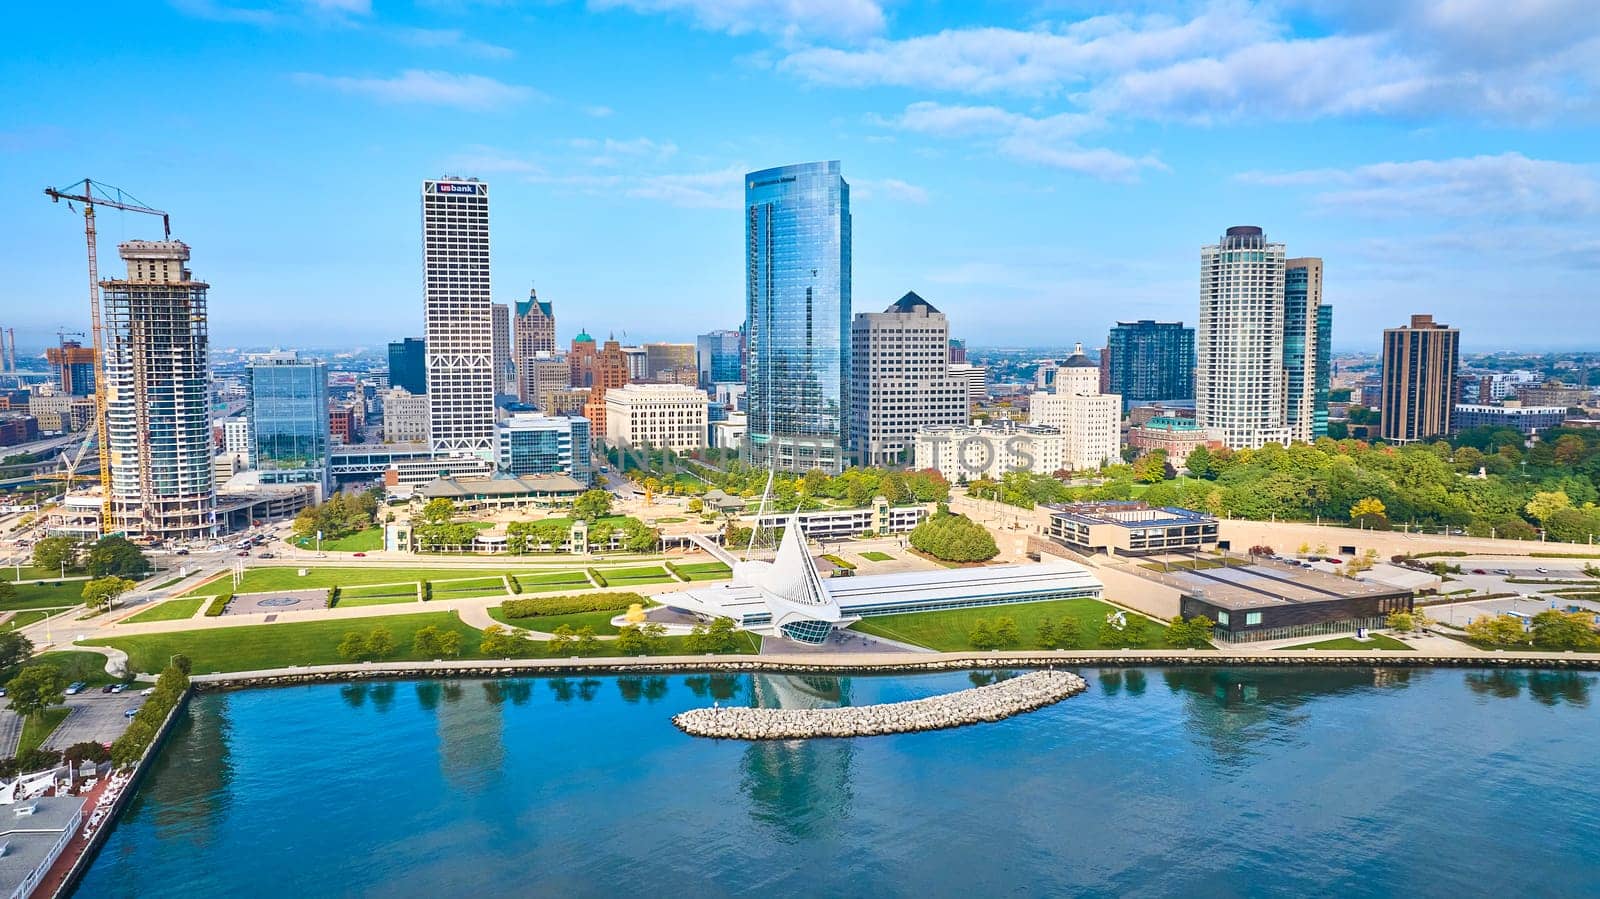 Aerial View of Milwaukee's Vibrant Skyline with Iconic Quadracci Pavilion and Lake Michigan, Displaying Urban Growth and Architectural Diversity, 2023